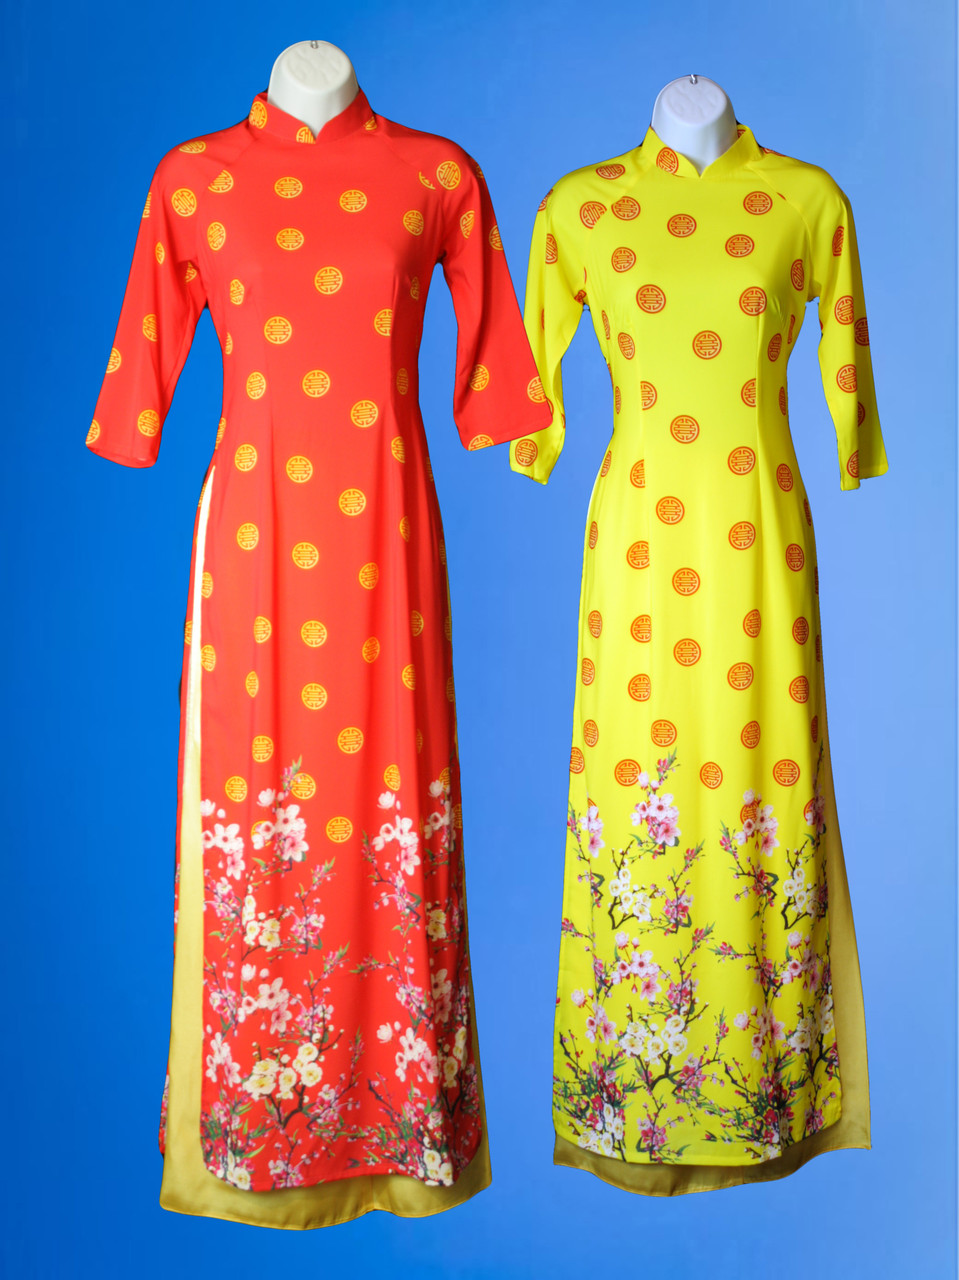 Ao dai lady lucky charm and magnolia blossoms